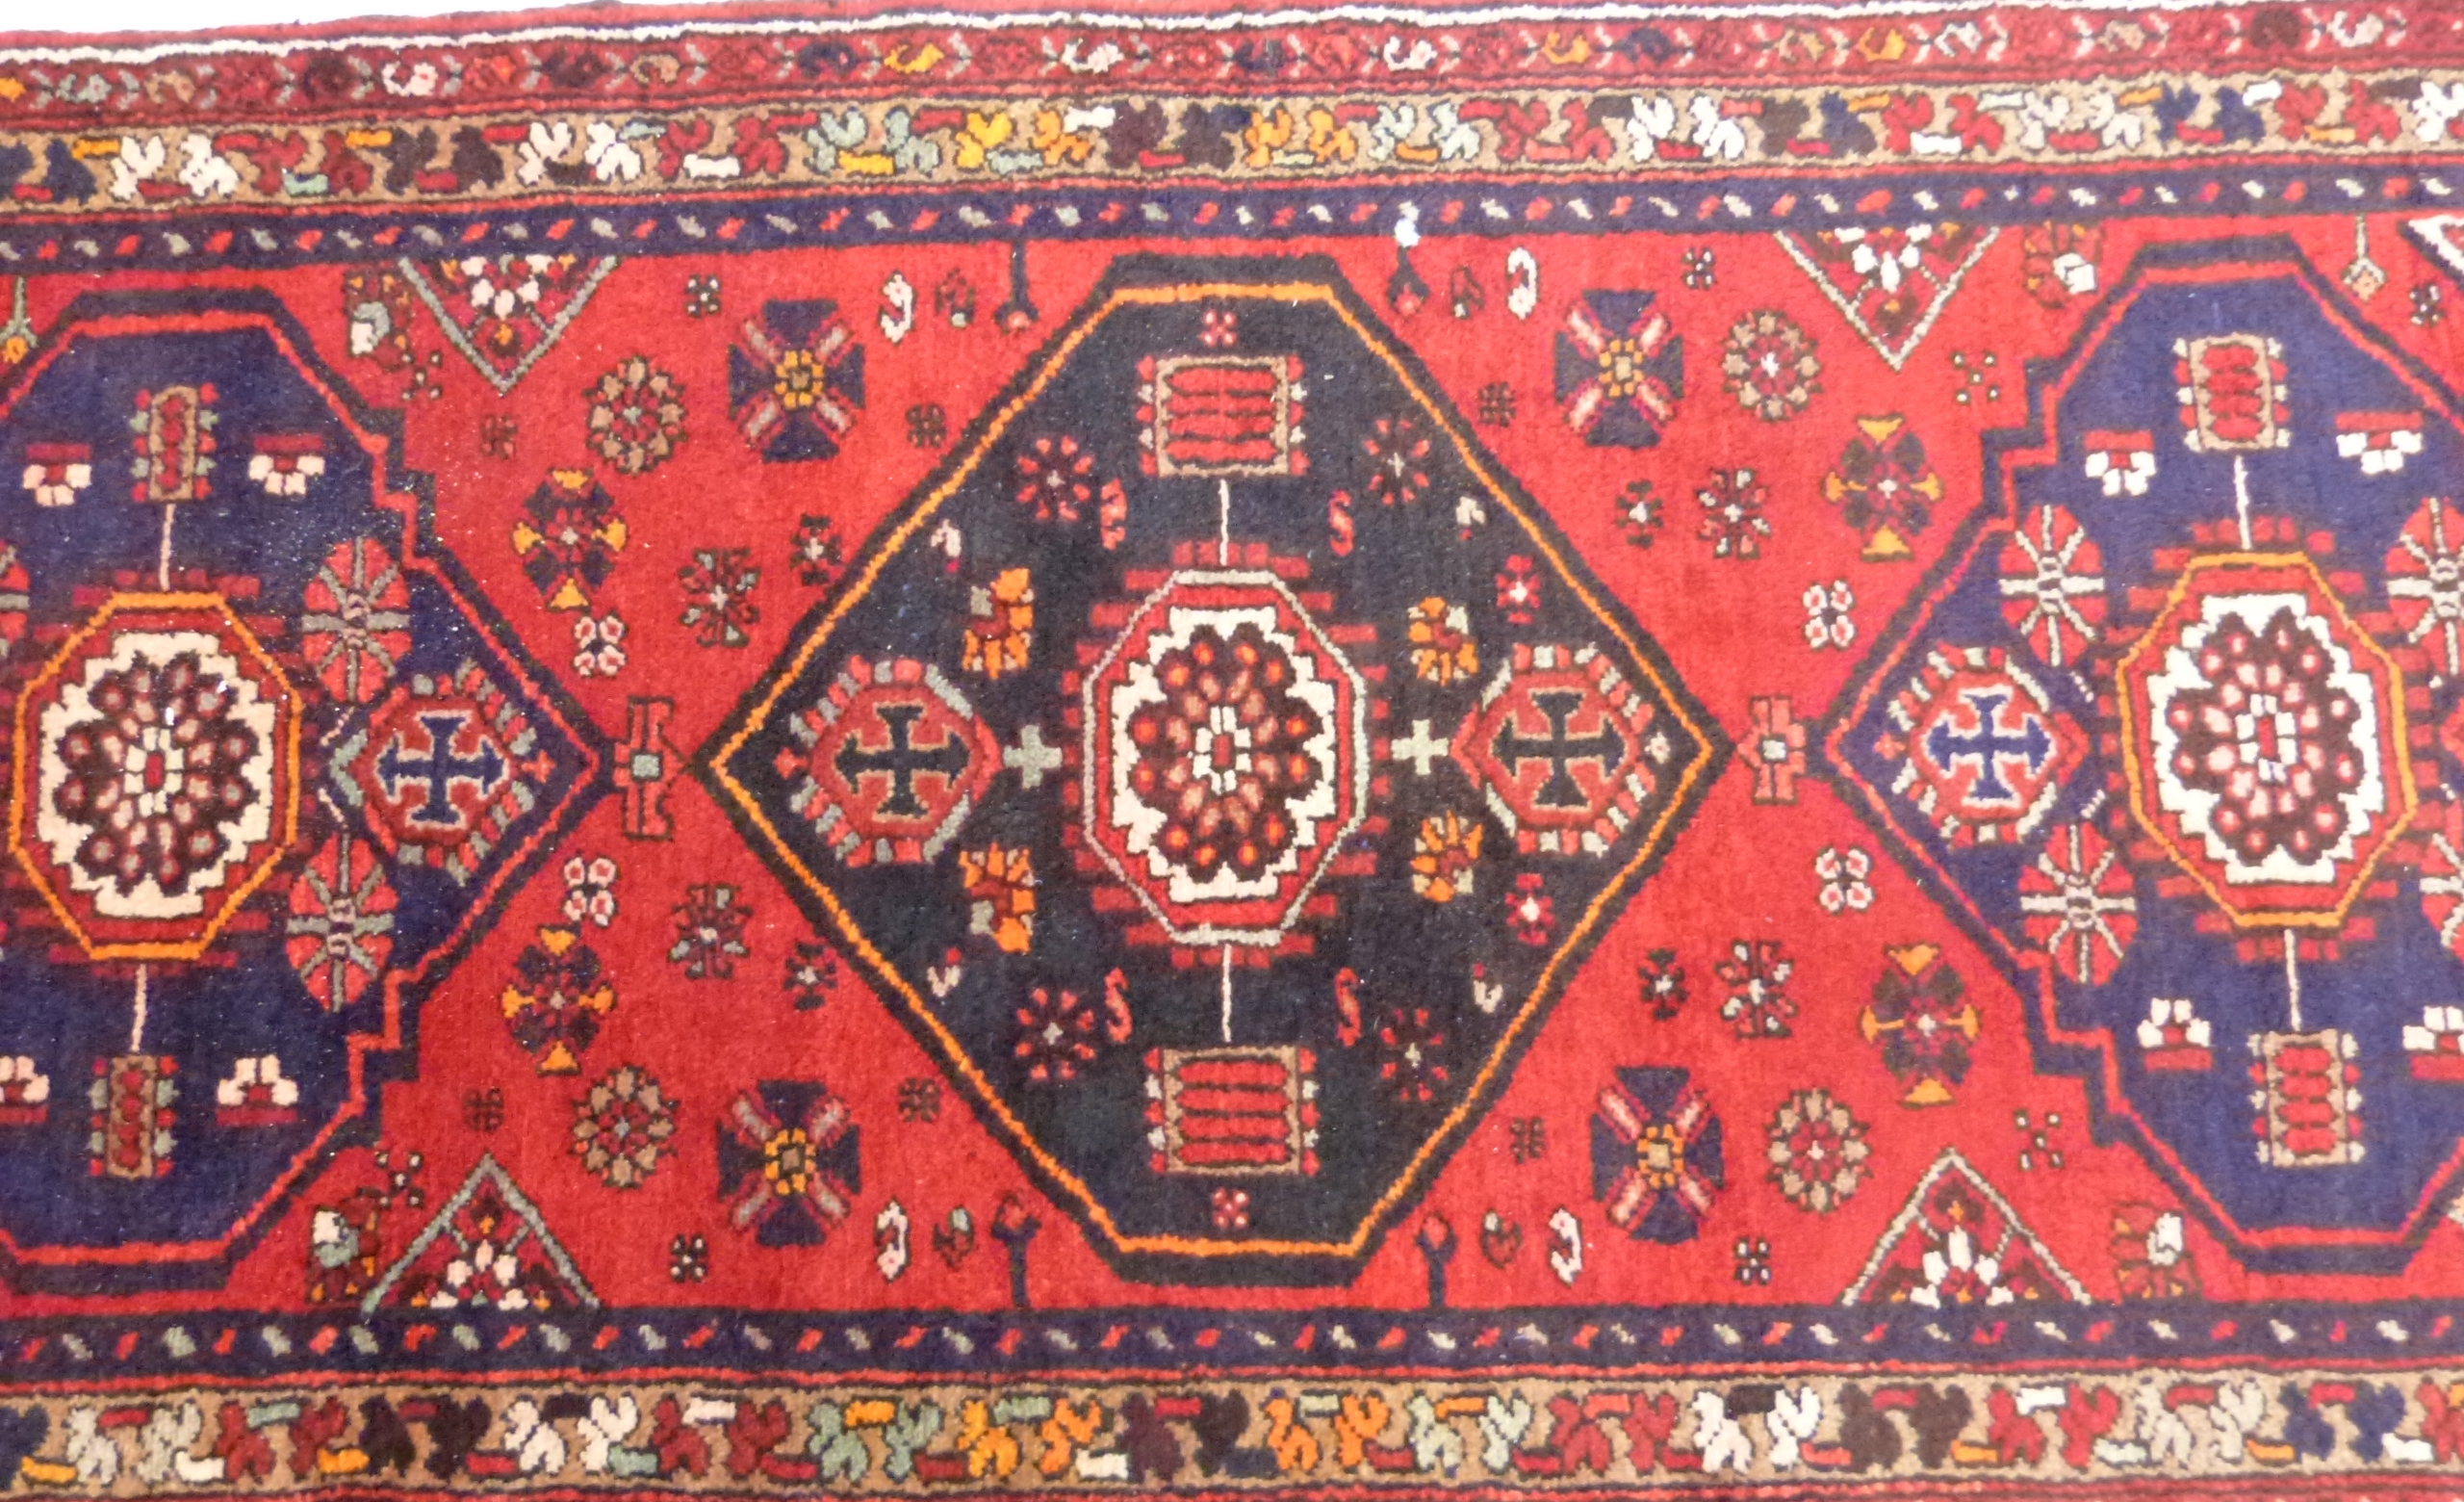 Rich red ground full pile Persian Hamadan Runner 286cm x 110cm approximately - Image 4 of 6